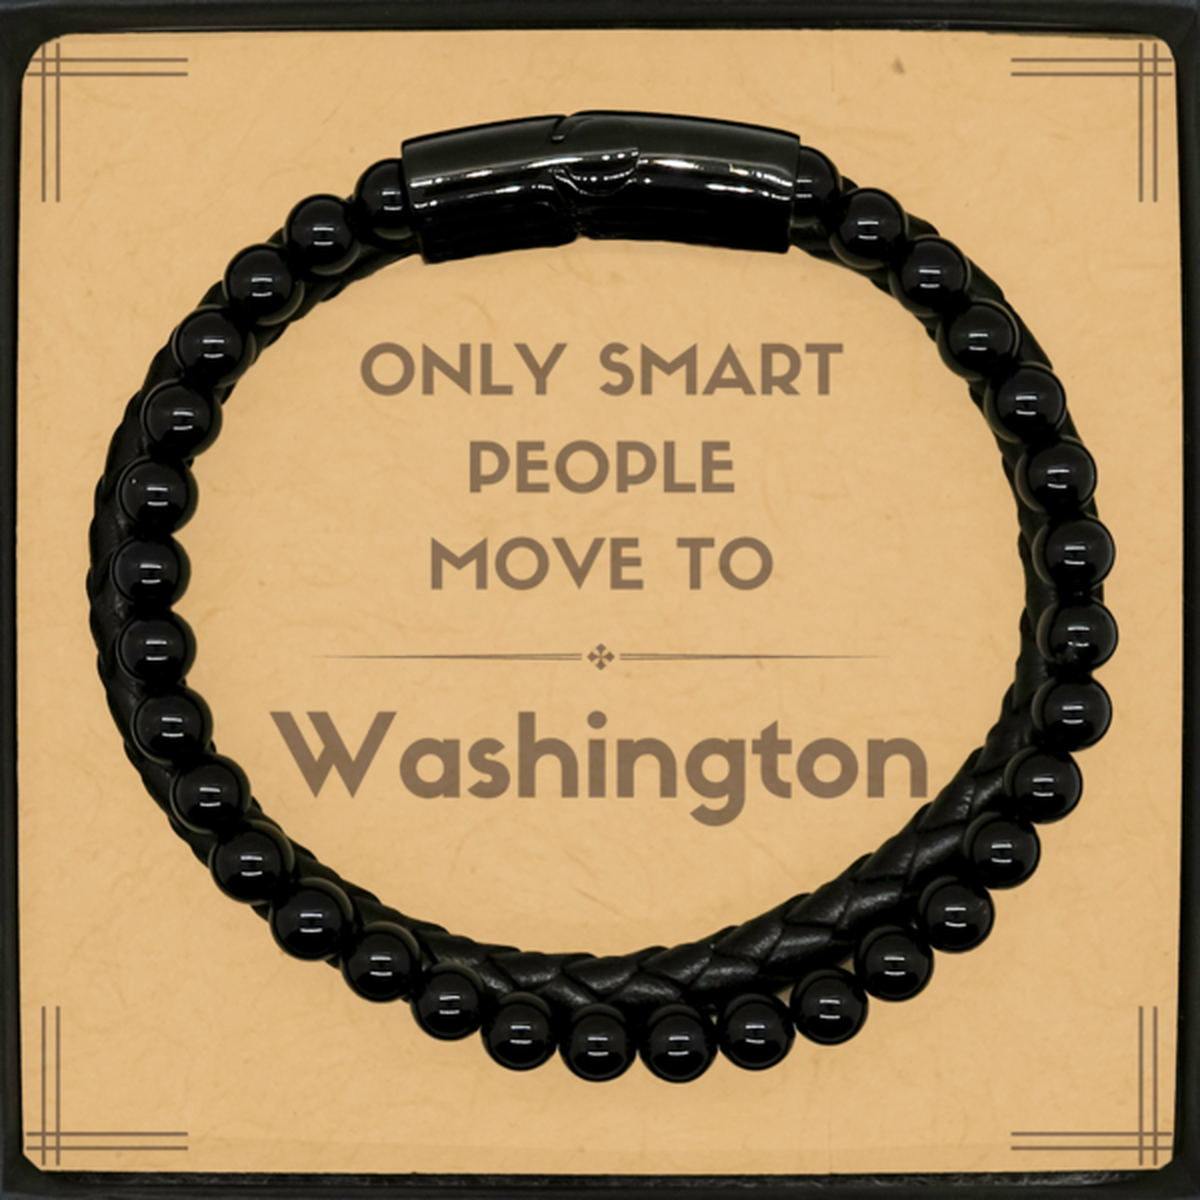 Only smart people move to Washington Stone Leather Bracelets, Message Card Gifts For Washington, Move to Washington Gifts for Friends Coworker Funny Saying Quote